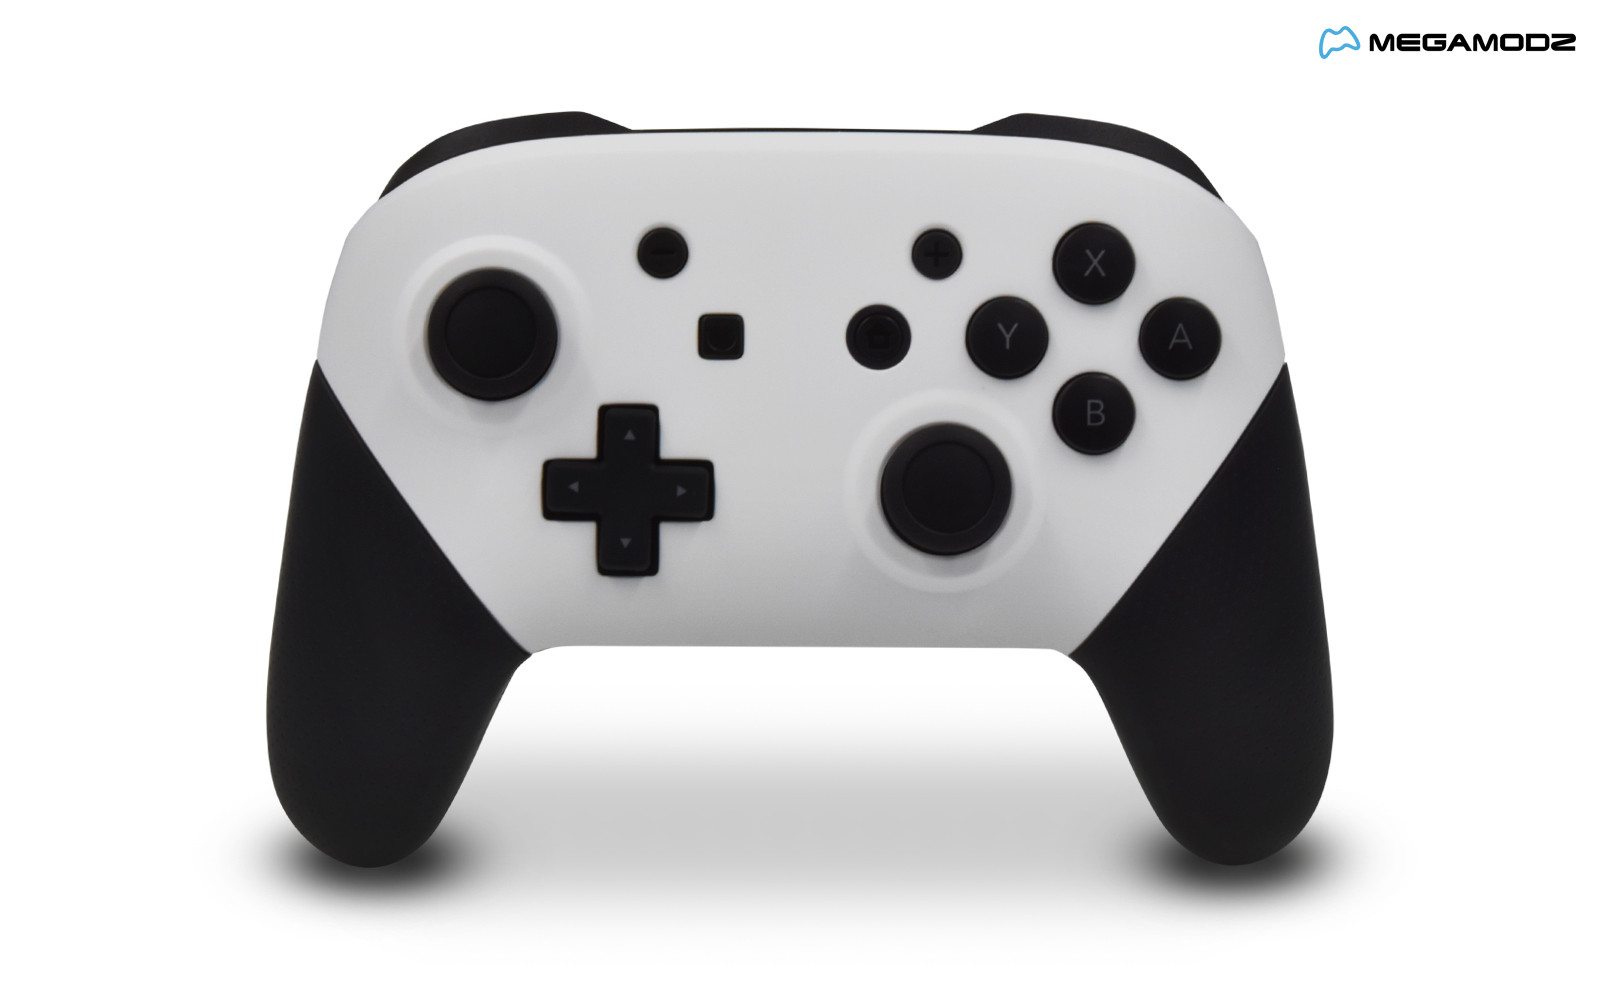 switch pro controller white